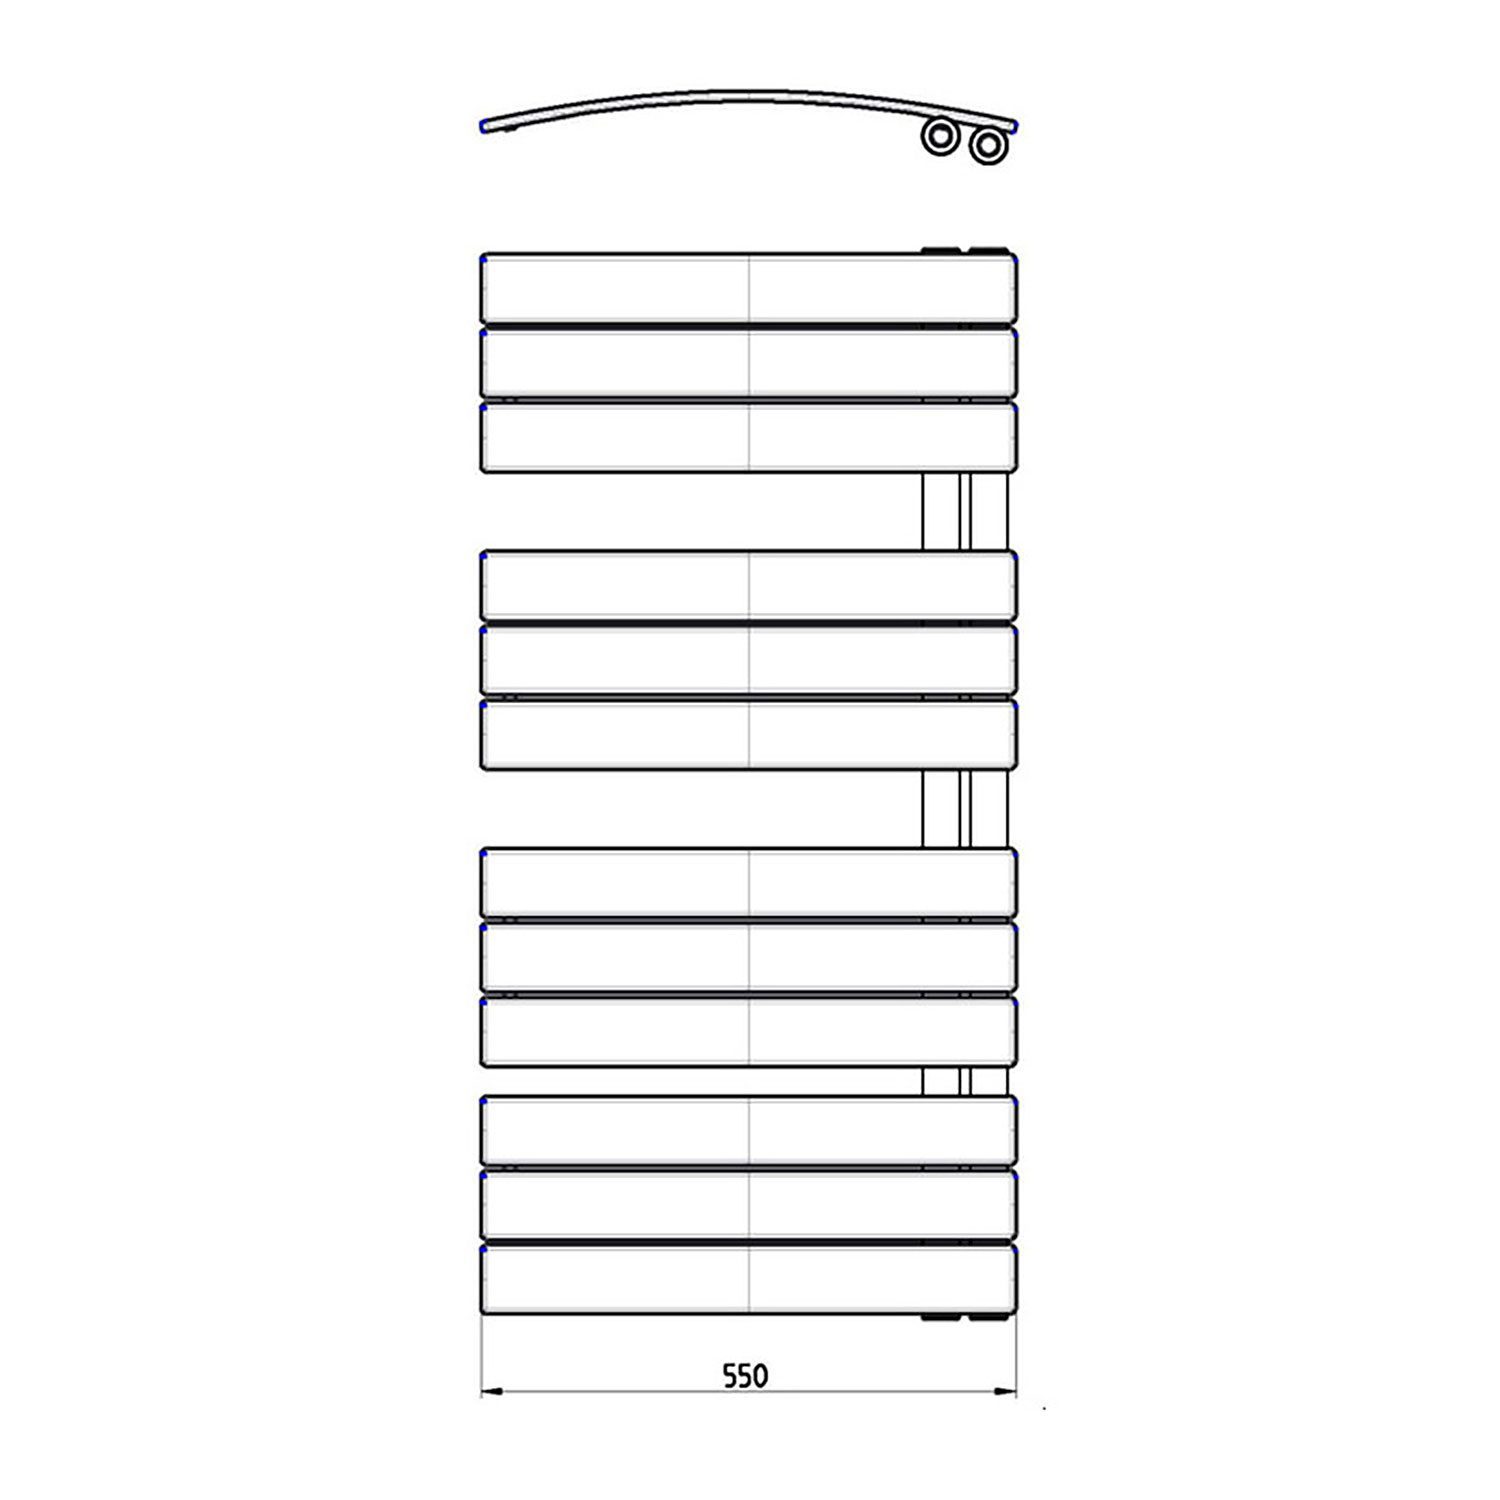 Simeto curved towel radiator product dimensions